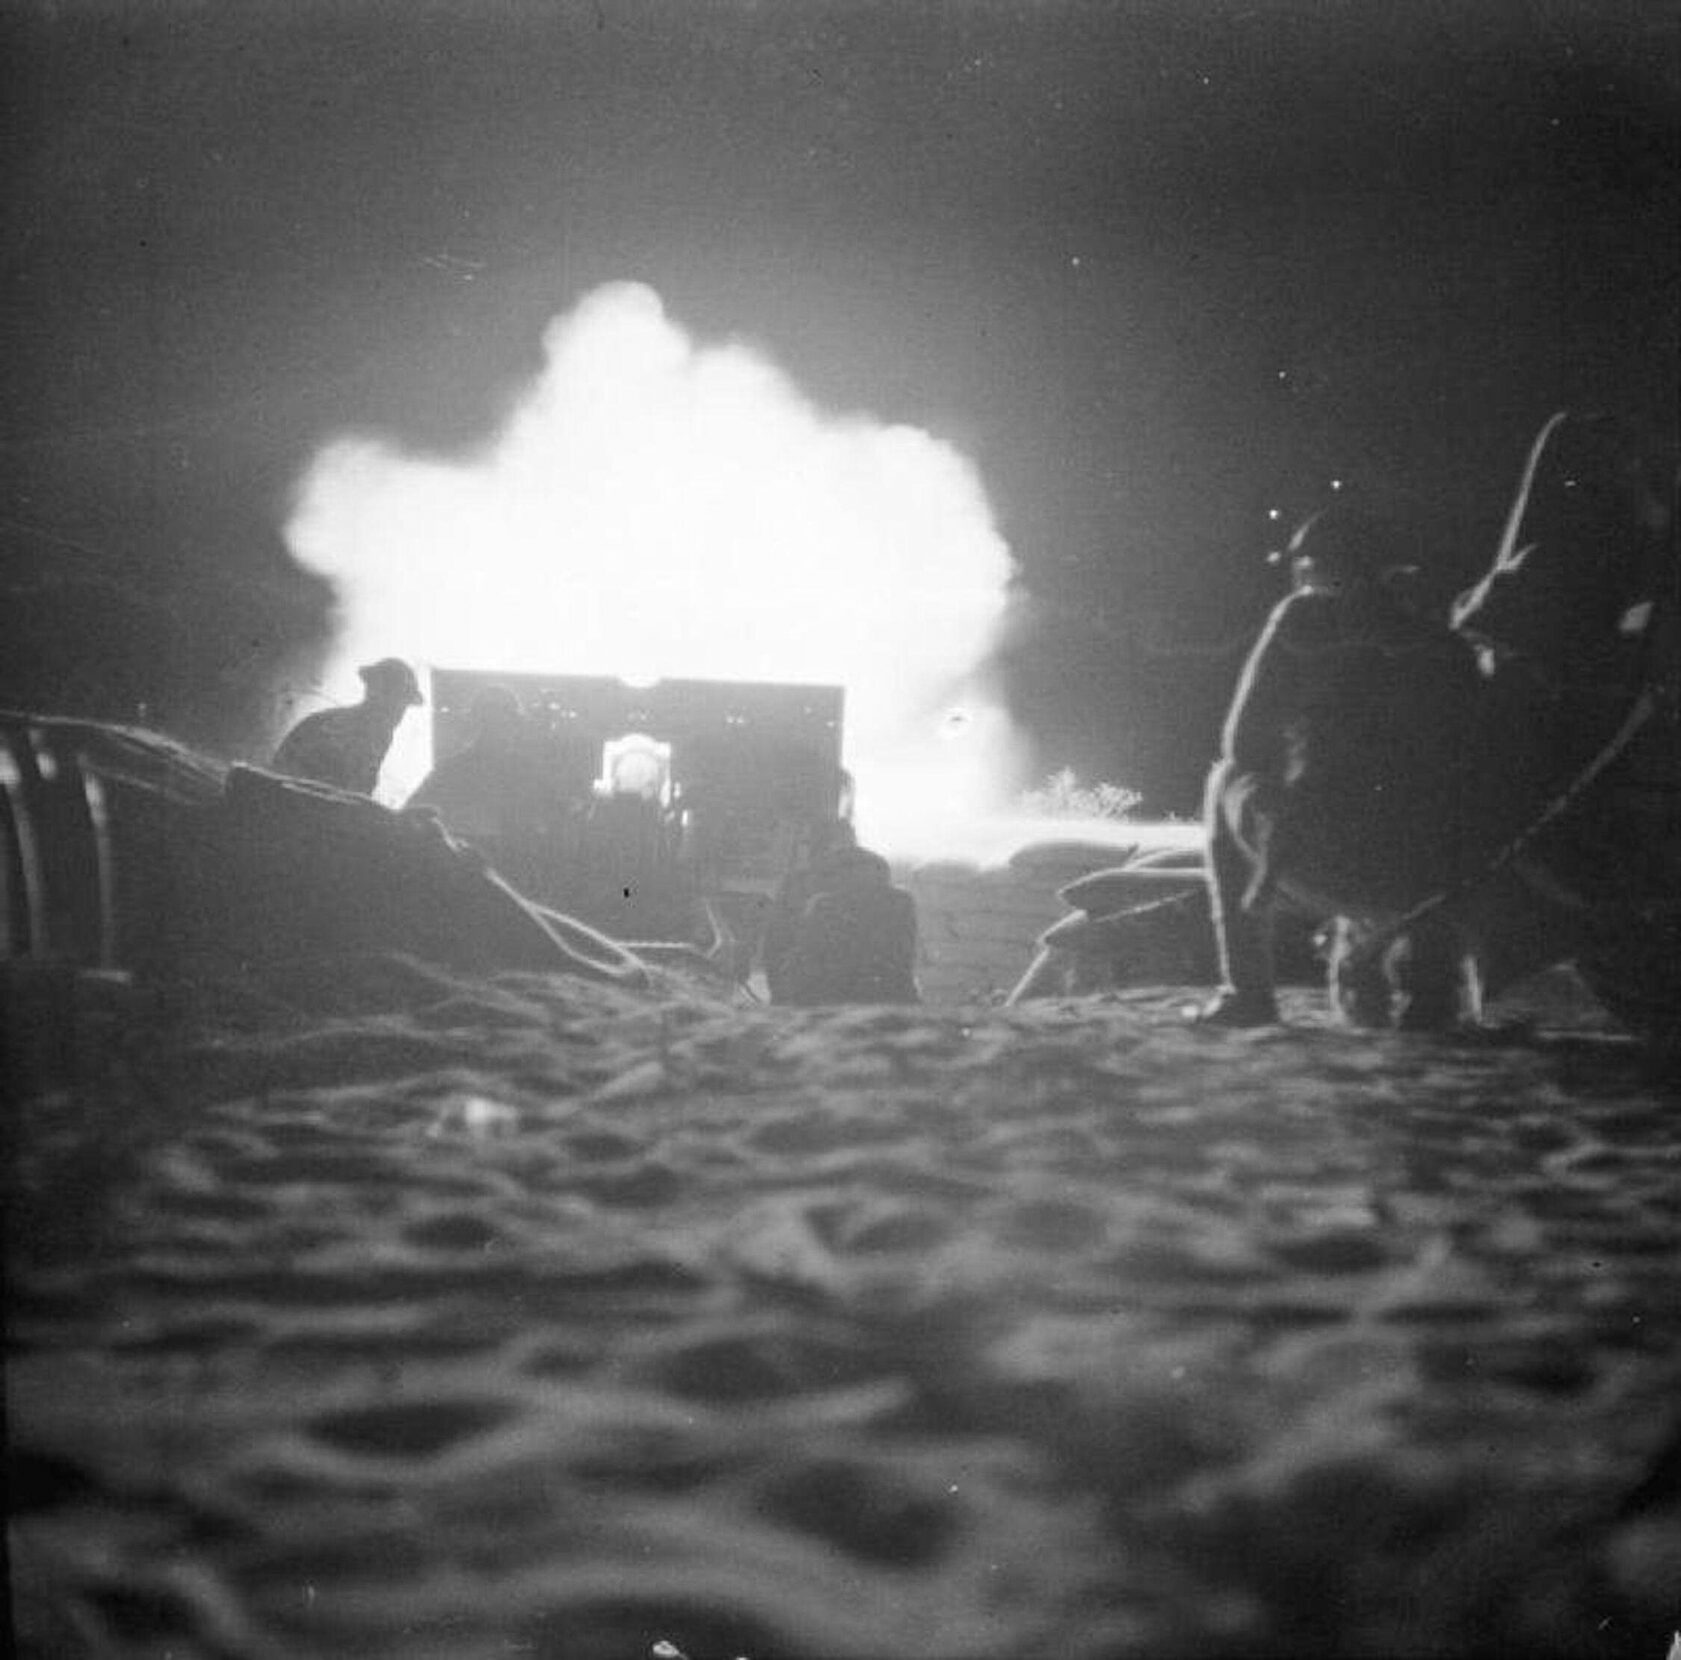 Black and white photo of silhouetted soldiers on the sand at night, with the plumes of an explosion on the horizon.